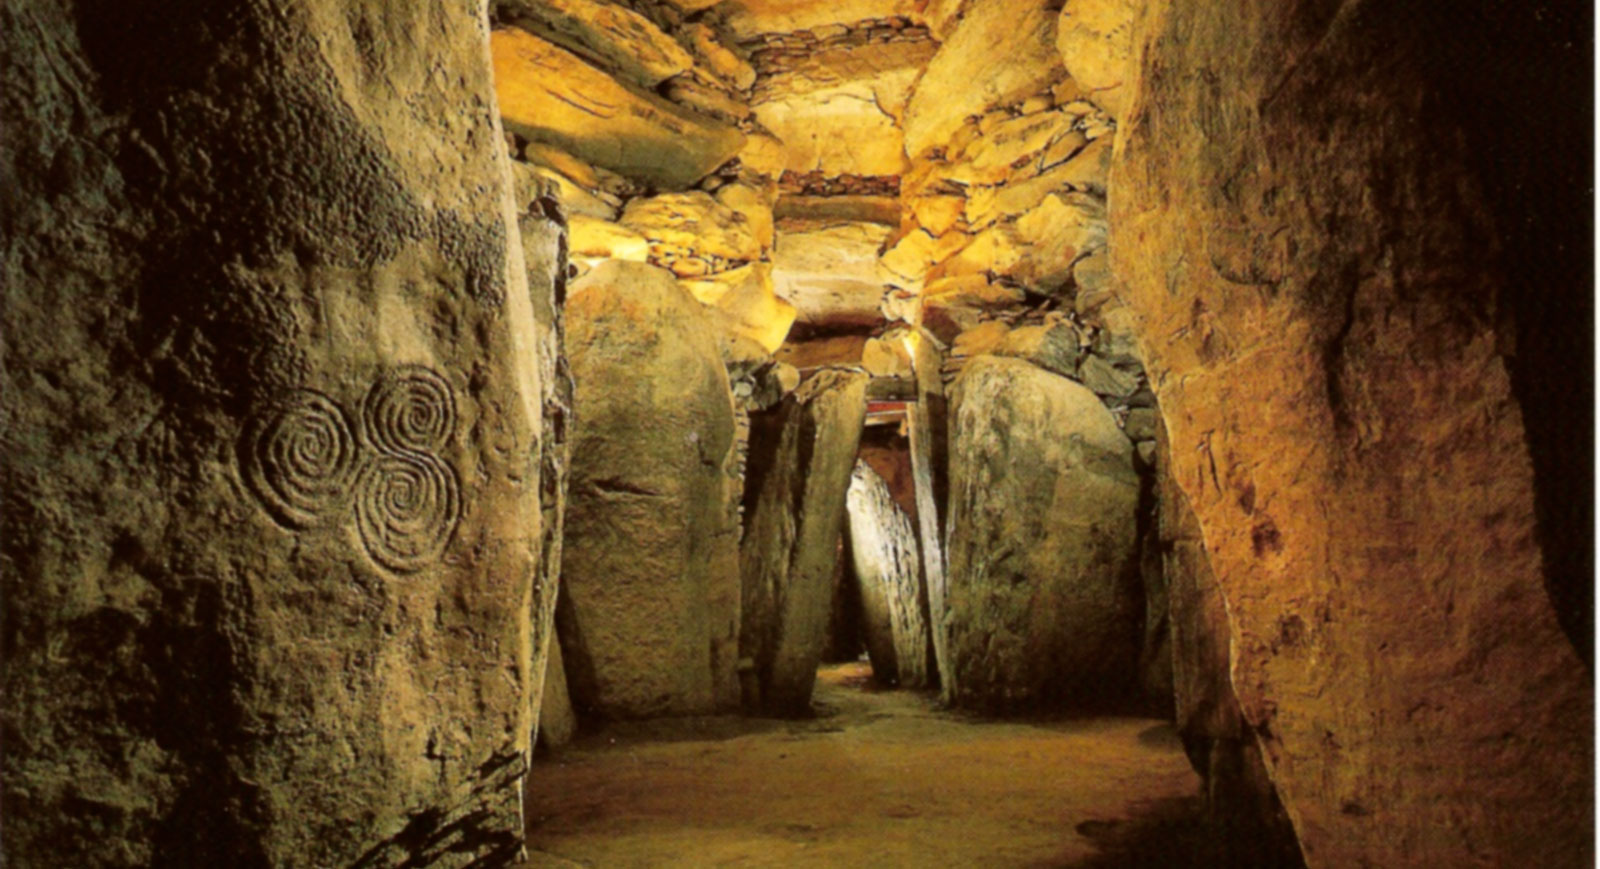 The view from the end recess looking across the chamber and down into the passage of Newgrange. This photograph was used for the cover of Professor Michael O'Kelly's book on Newgrange. Image © Office of Public Works.